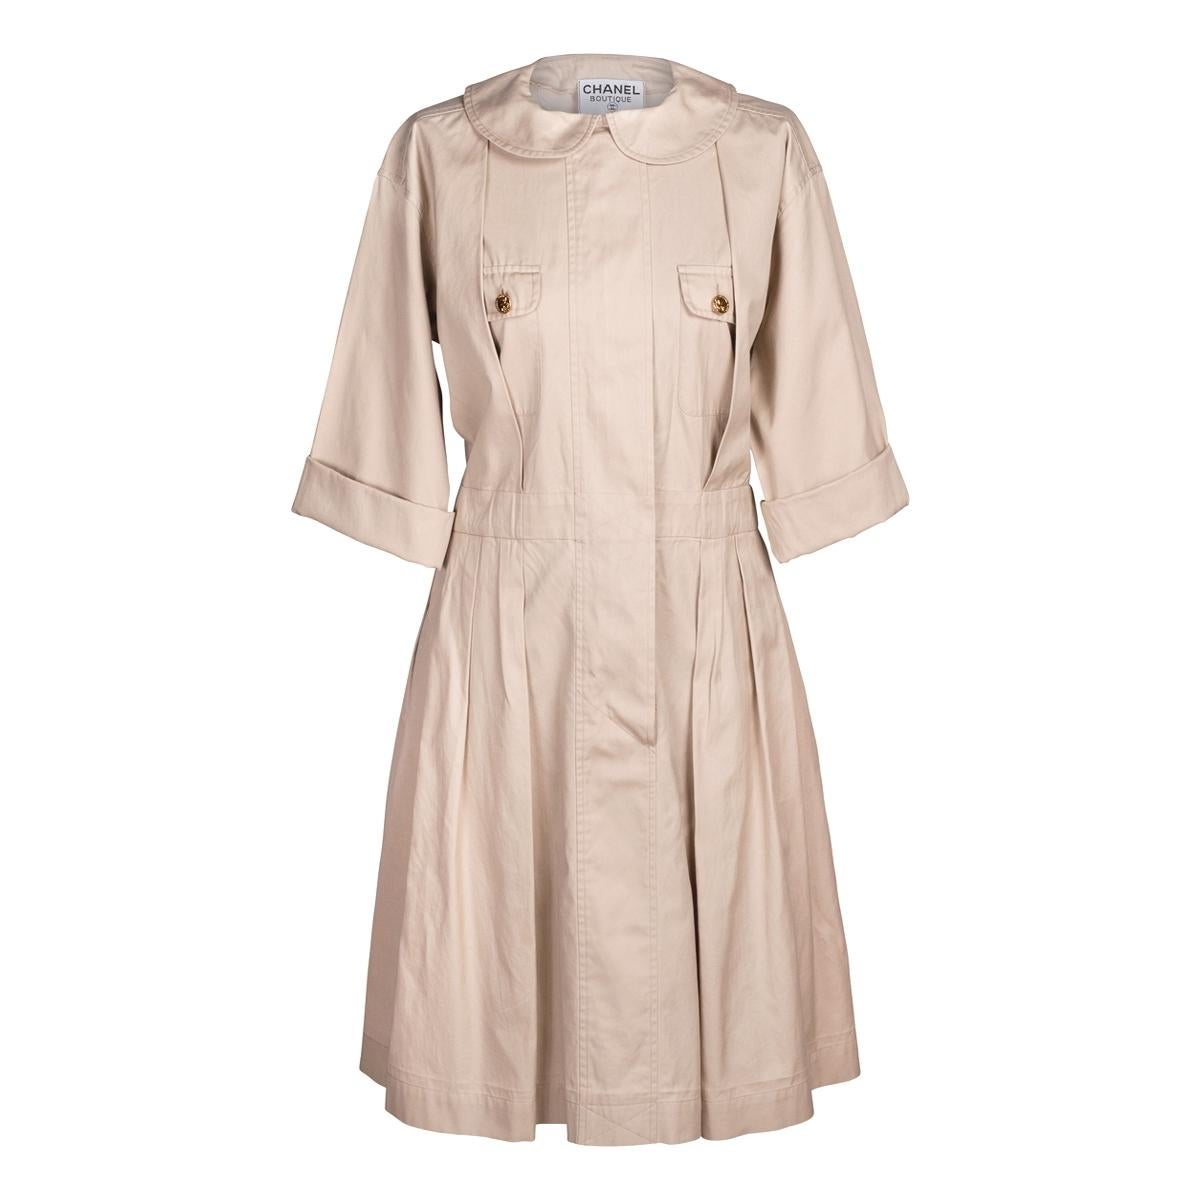 Vintage pre-owned Chanel beige safari trench-style cotton dress, made in France, 1990s.

This vintage pre-owned Chanel beige safari trench-style cotton dress is very elegant and is in good condition. Please note that the length of the dress was